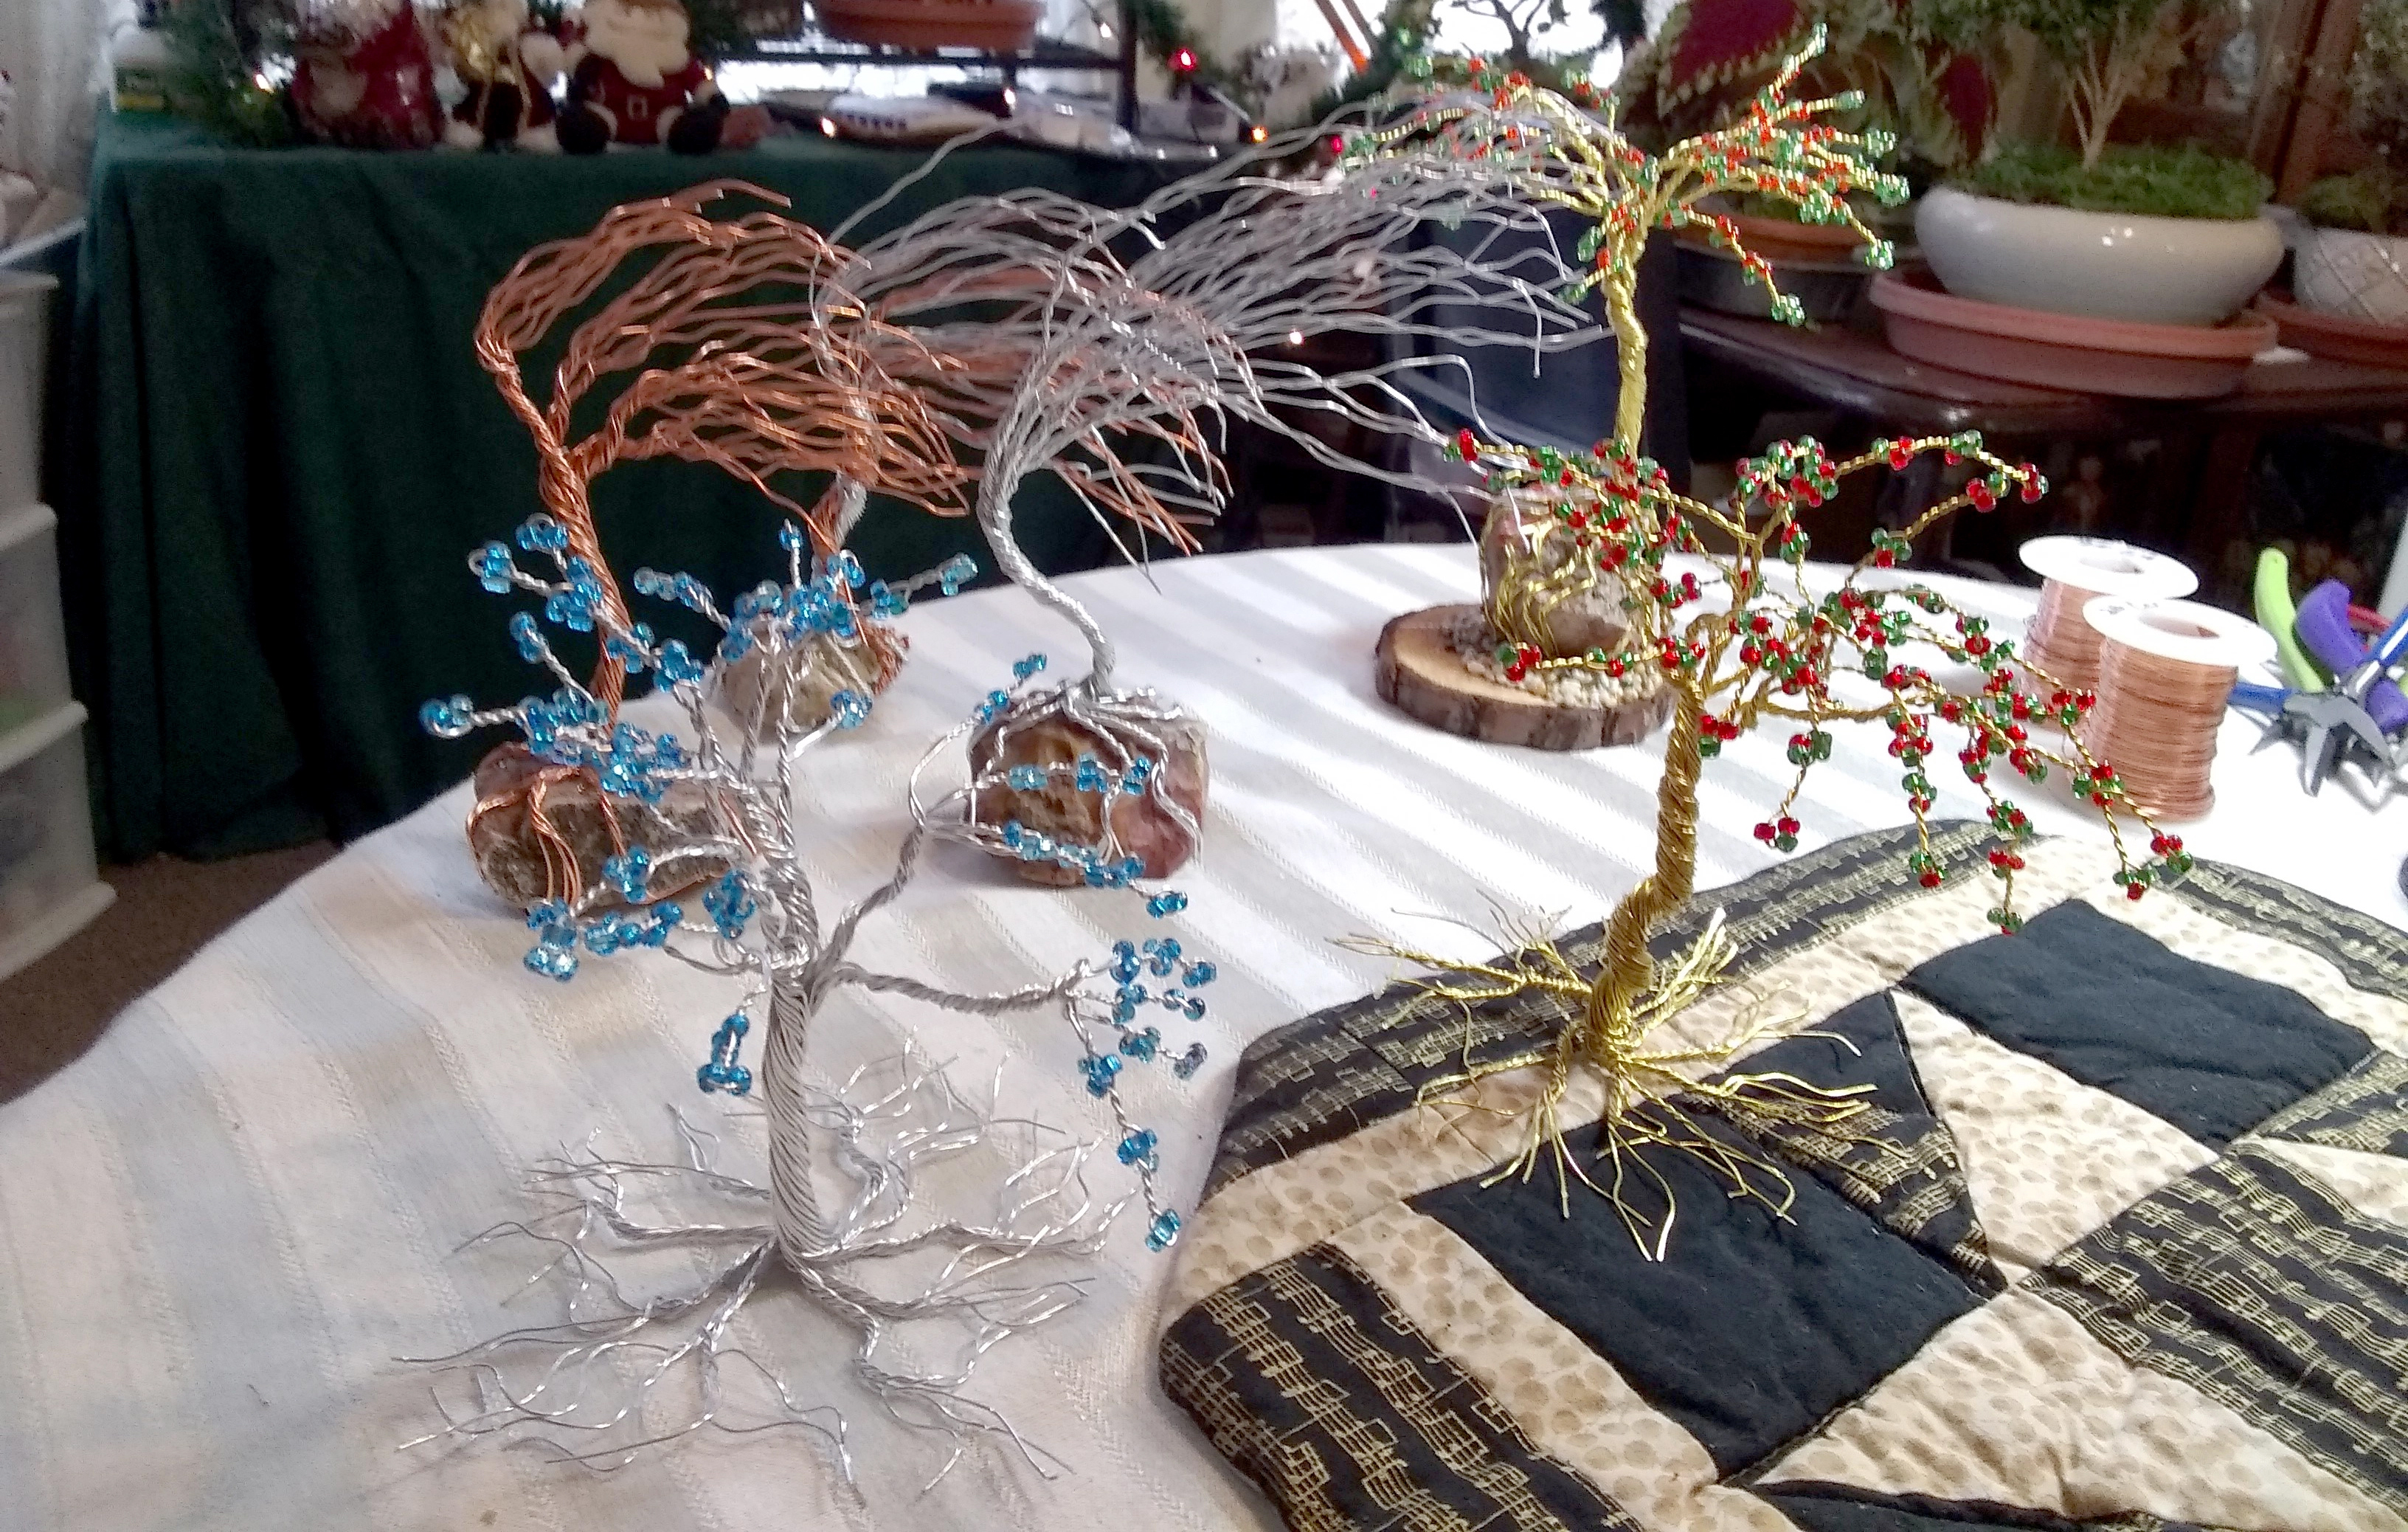 Bonsai Trees made of wire